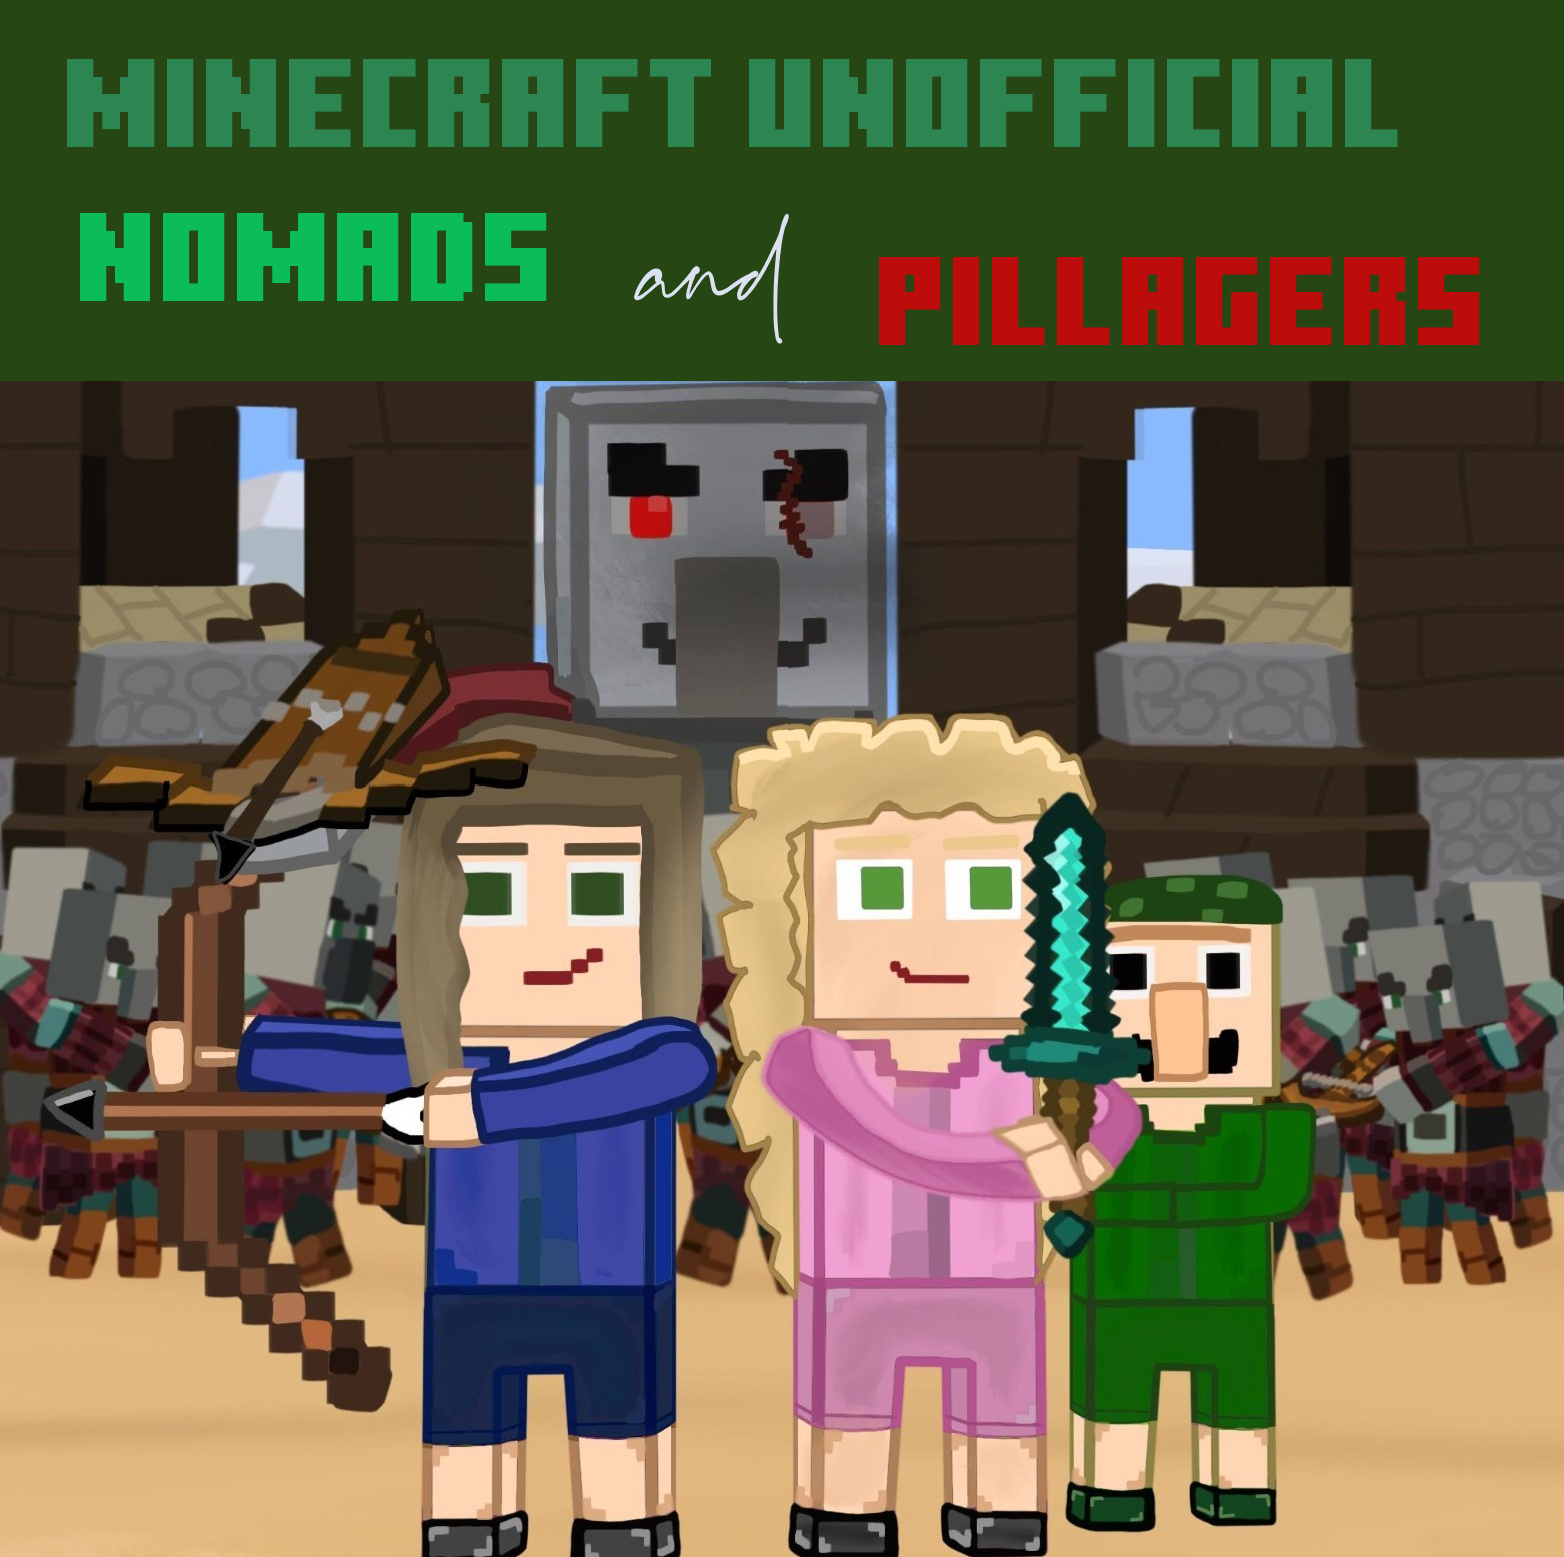 Minecraft Unofficial Nomads and Pillagers